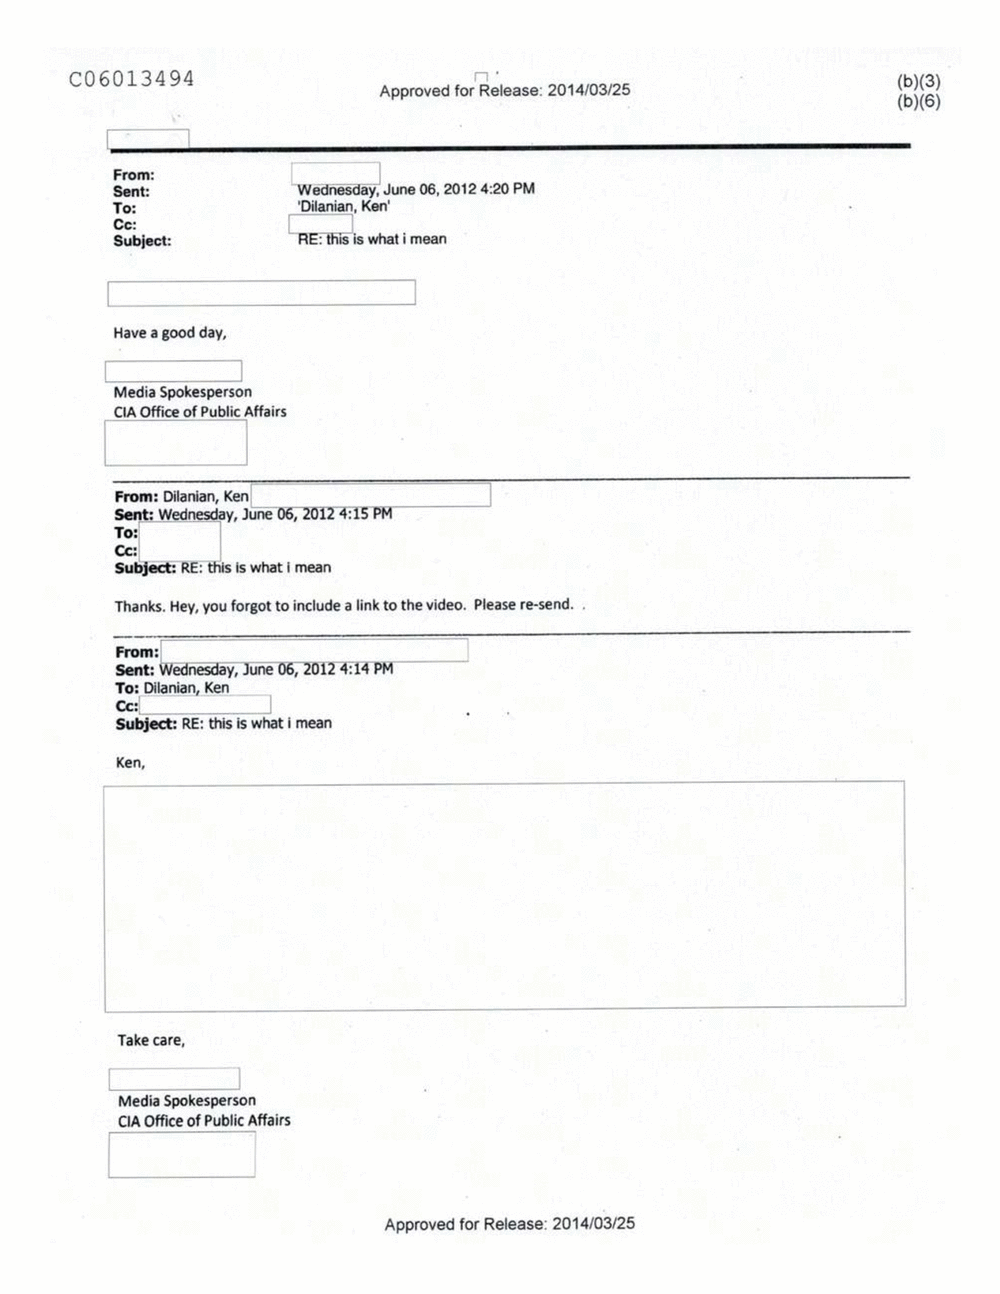 Page 343 from Email Correspondence Between Reporters and CIA Flacks